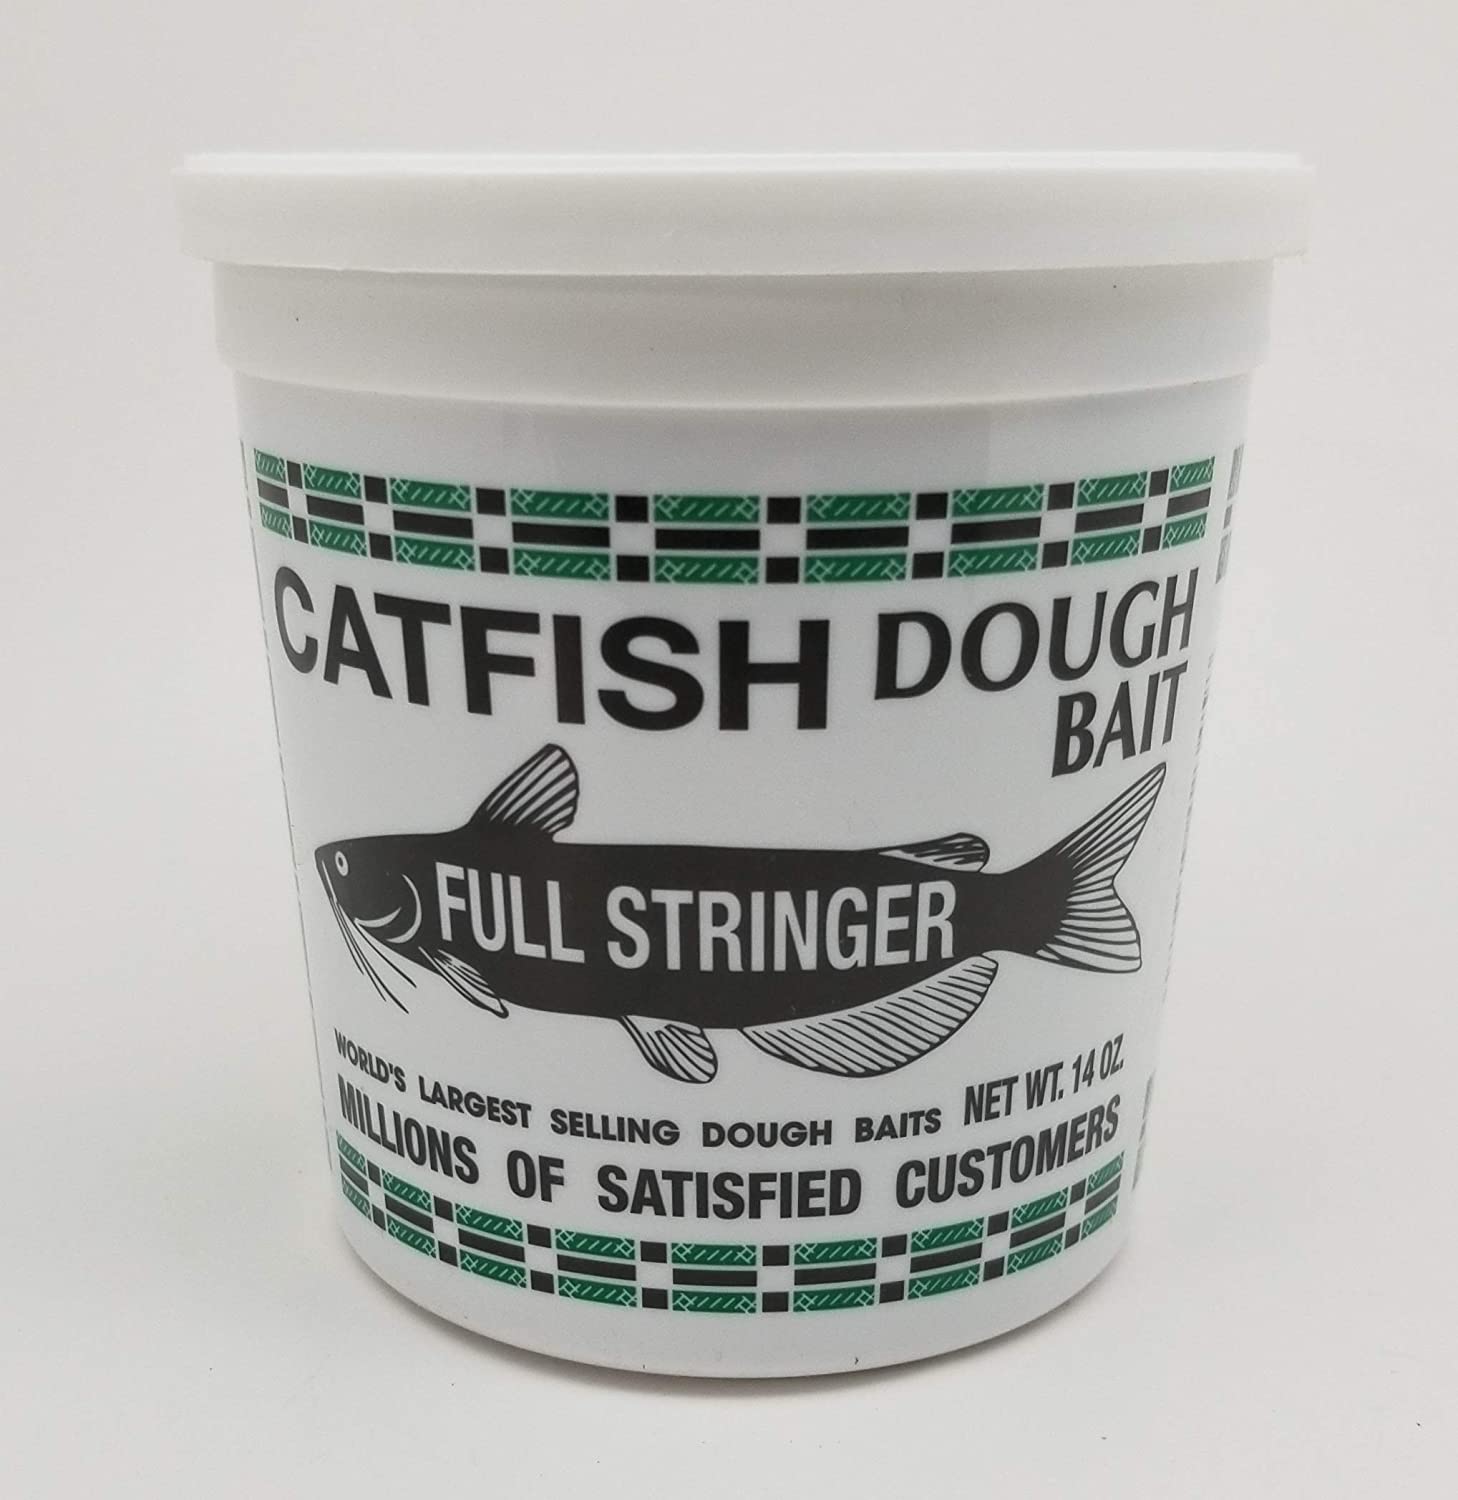 Catfish Charlie Wild Cat Pre Molded Blood Dough Bait in Resealable Bag 12  Oz.